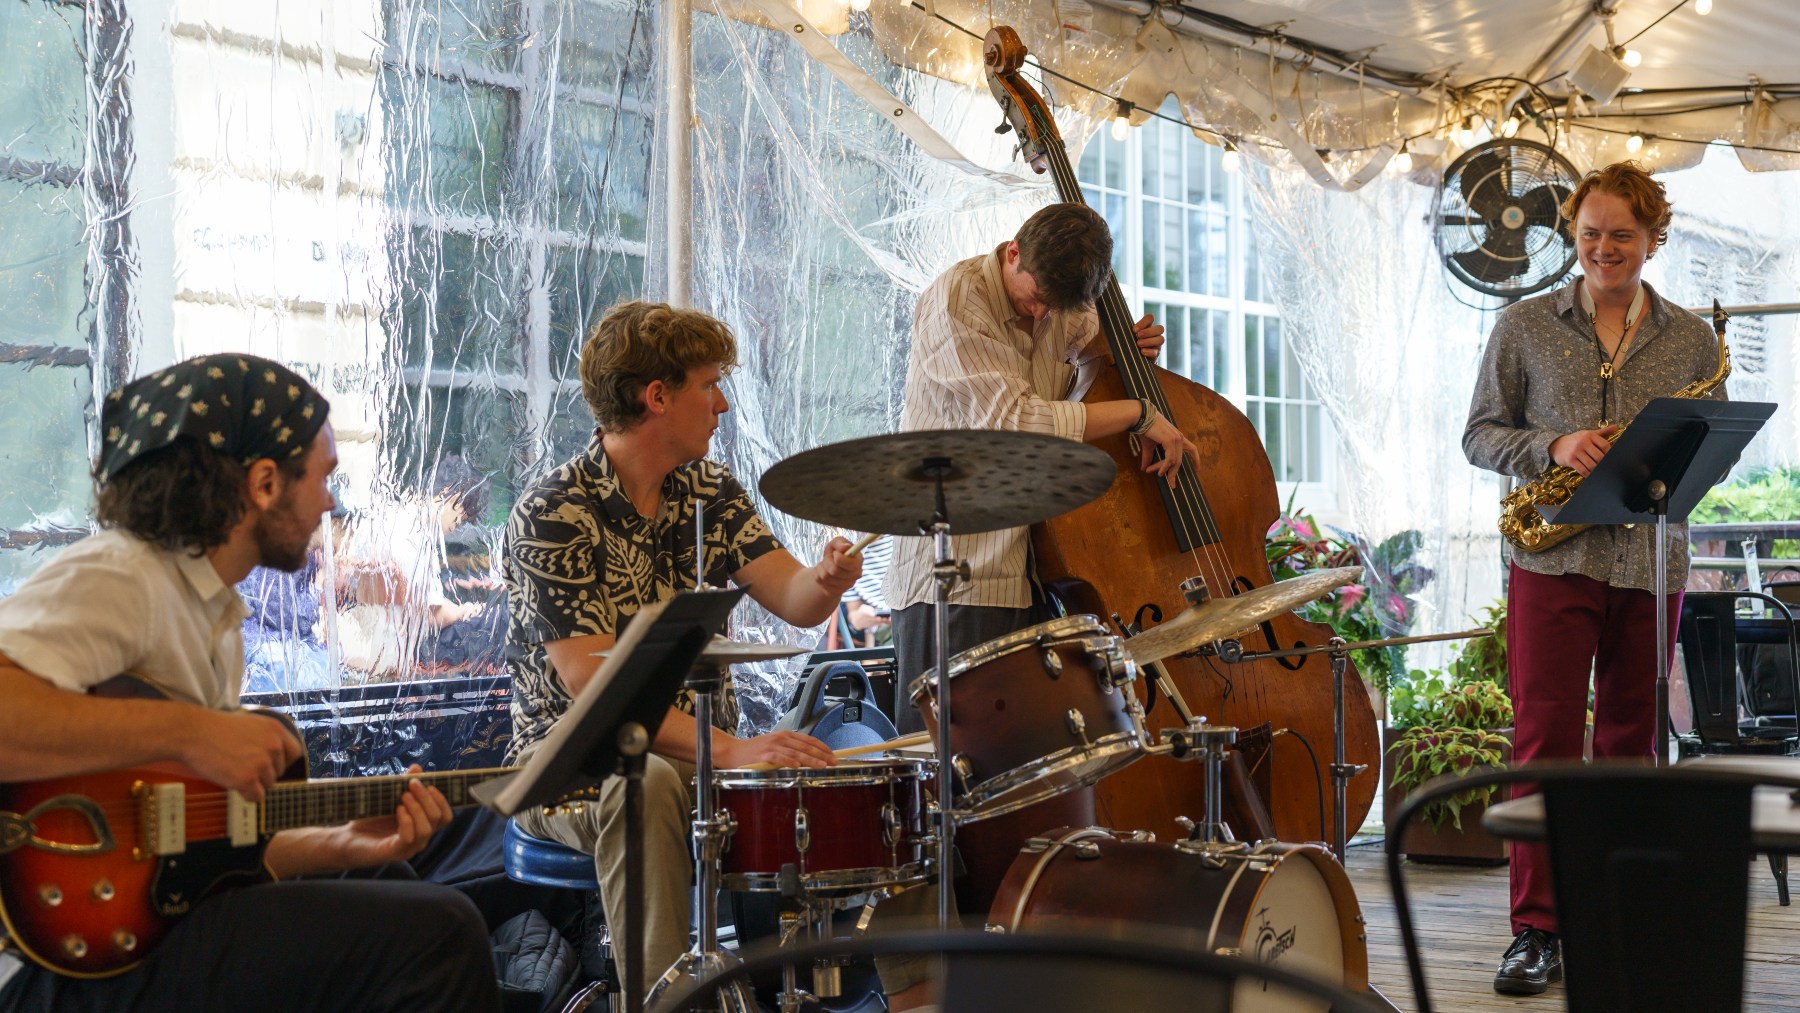 A band plays in an outdoor tent.